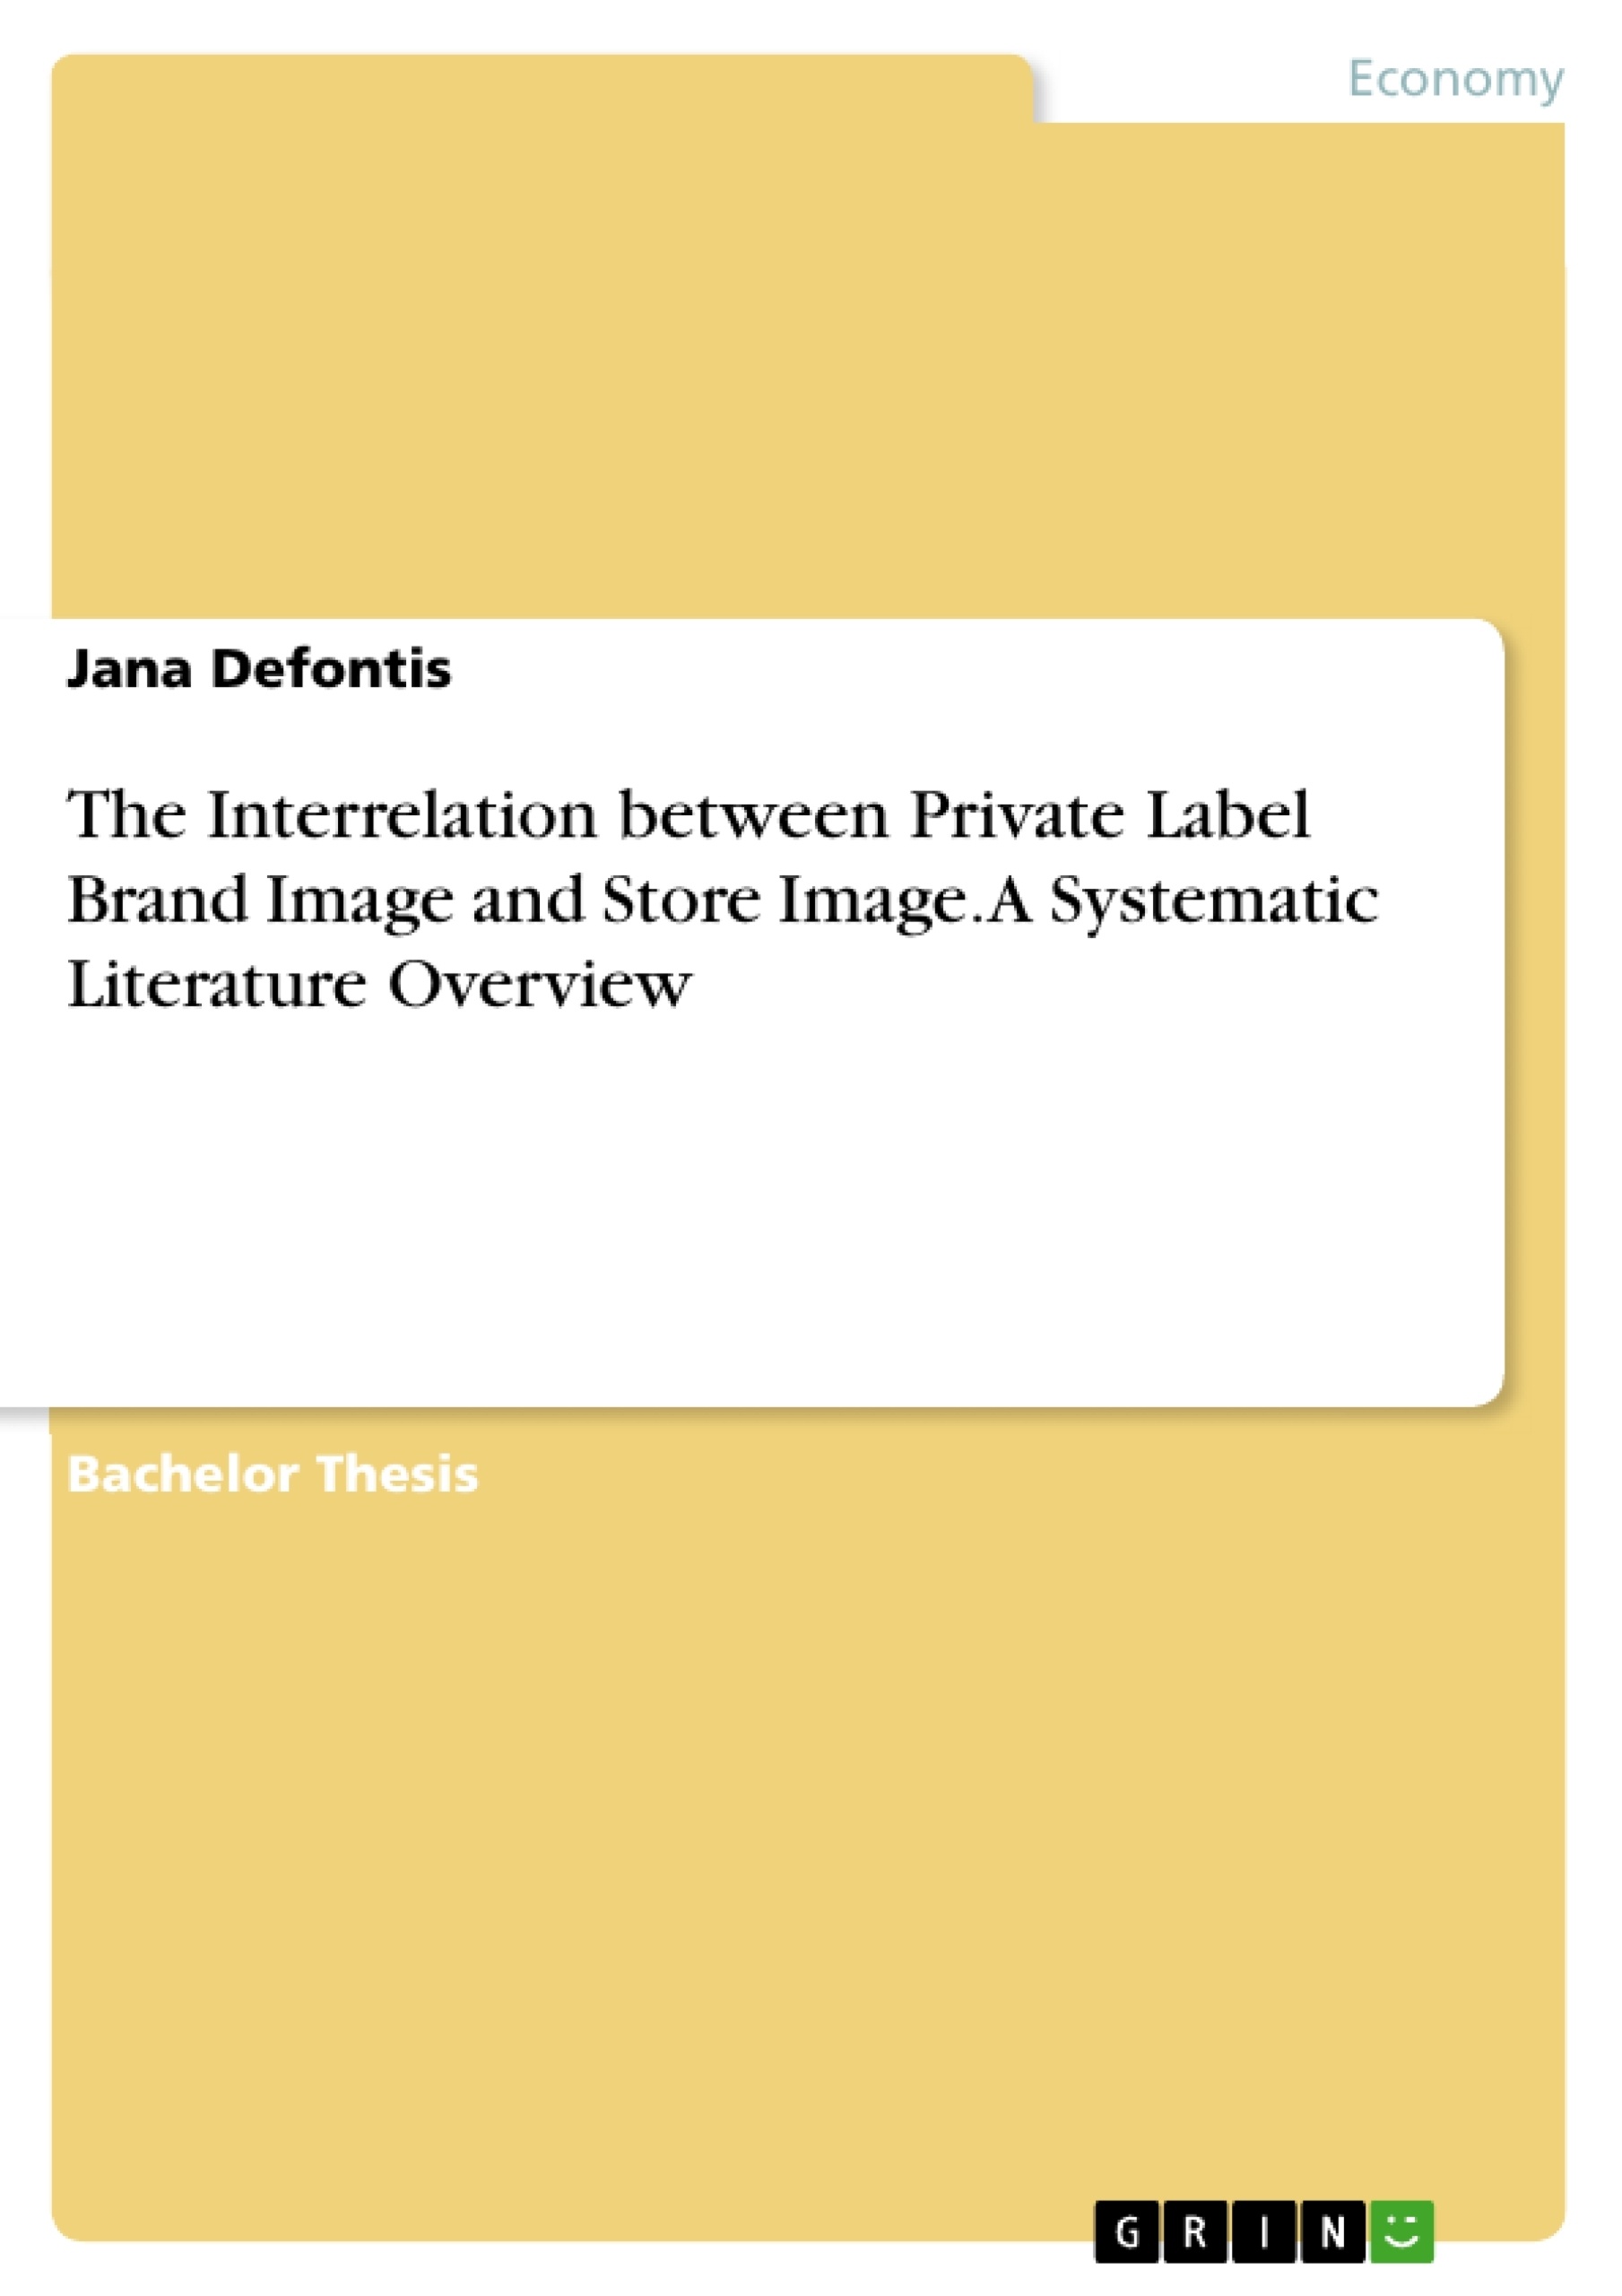 Title: The Interrelation between Private Label Brand Image and Store Image. A Systematic Literature Overview